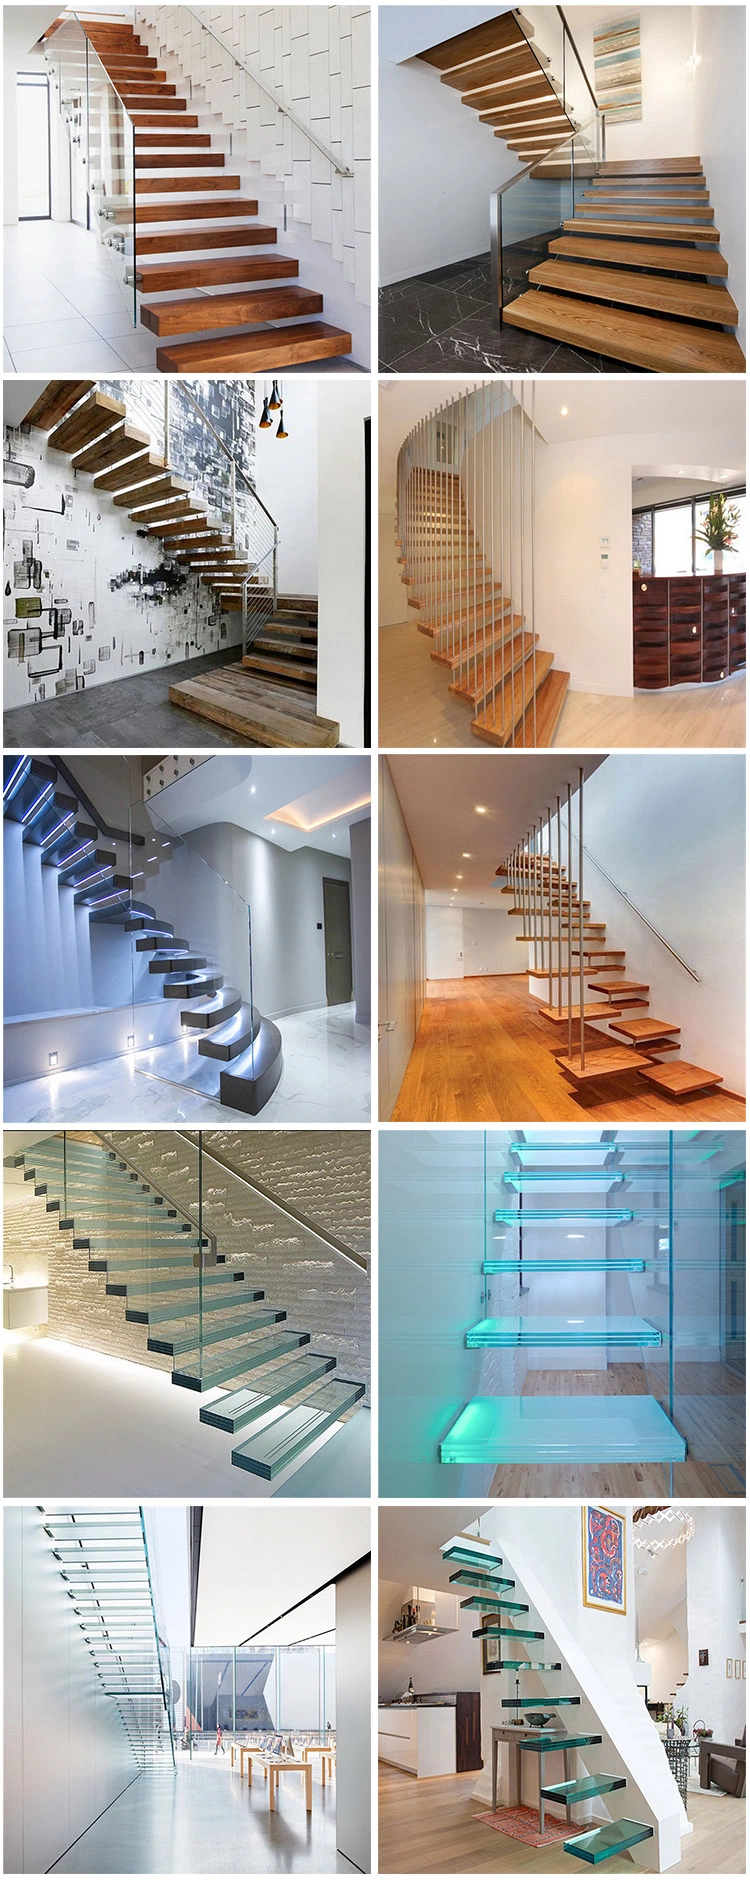 Modern Staircase Design Internal Floating Stair with LED Light